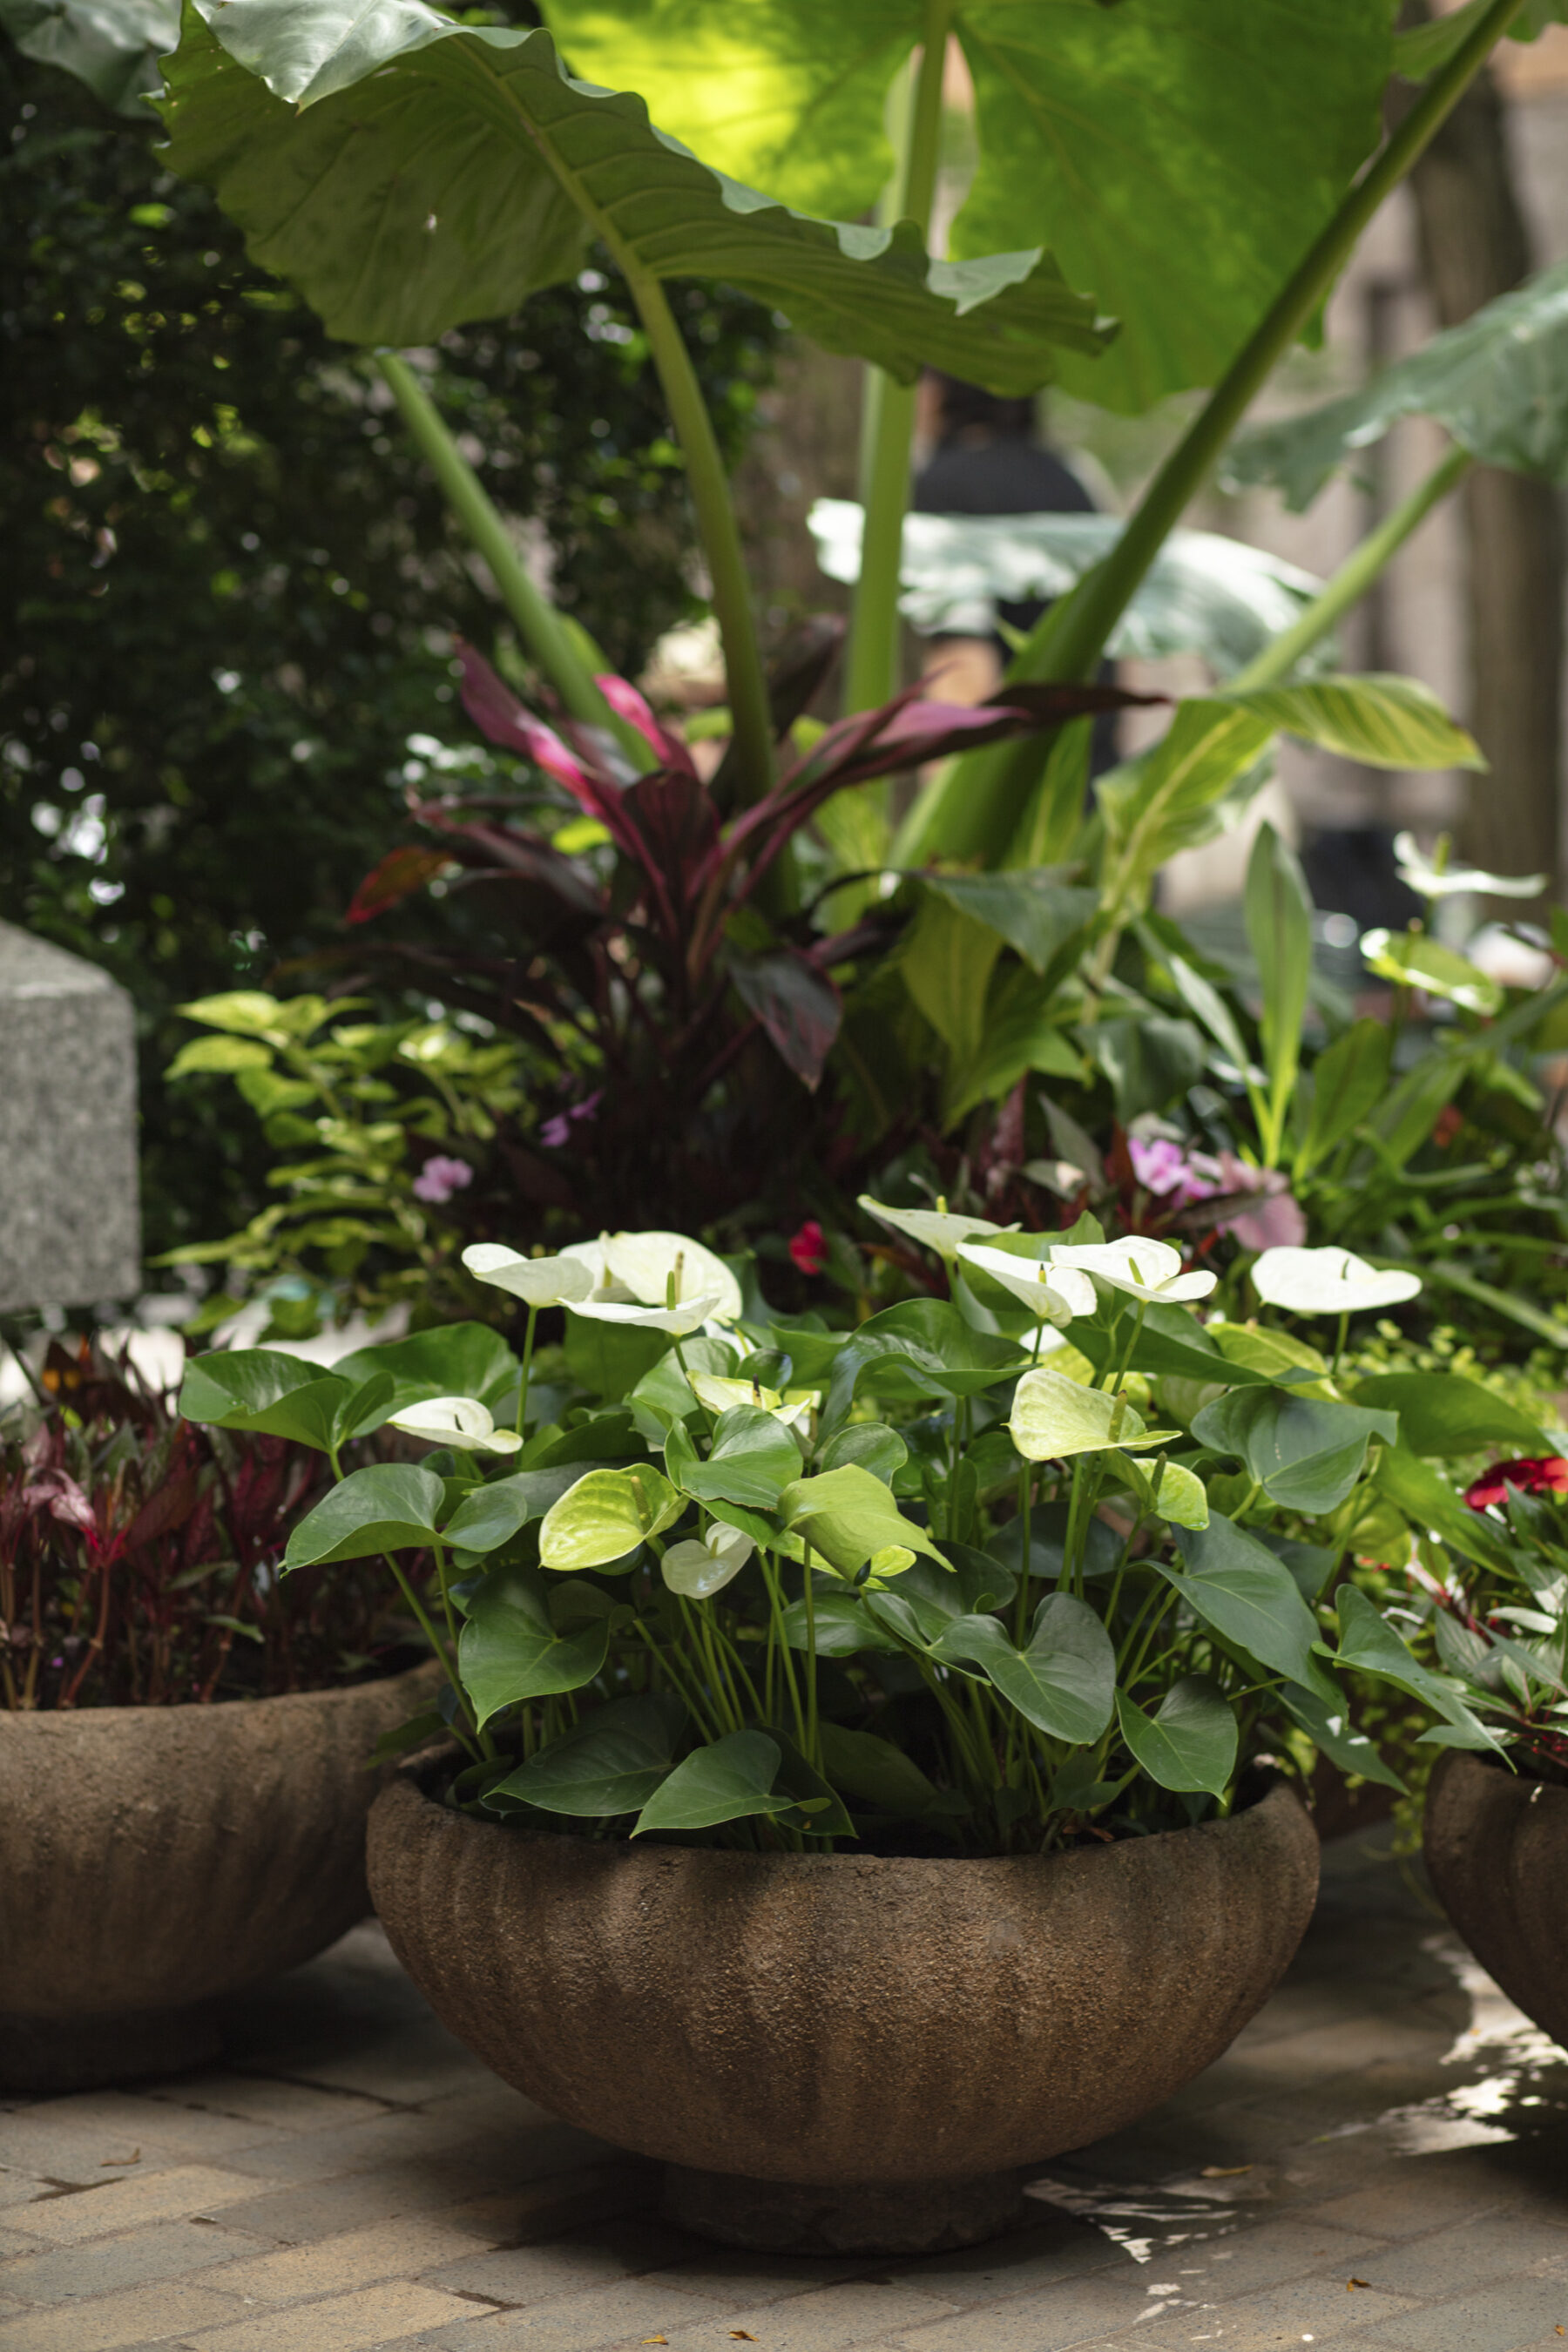 Close up of plantings in the decorative urns with lush summer tropicals